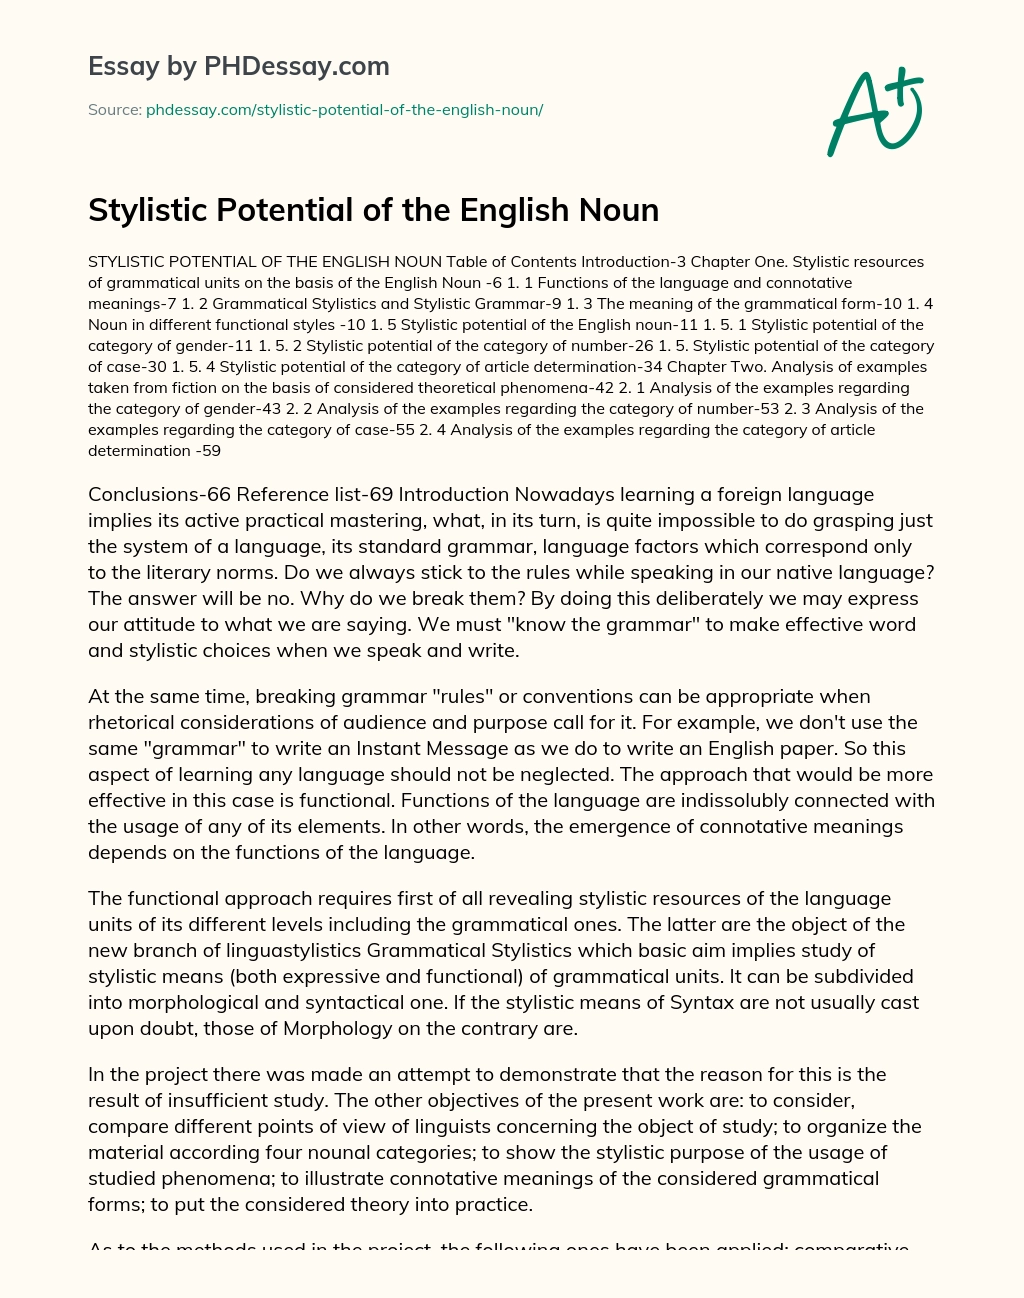 Stylistic Potential of the English Noun essay